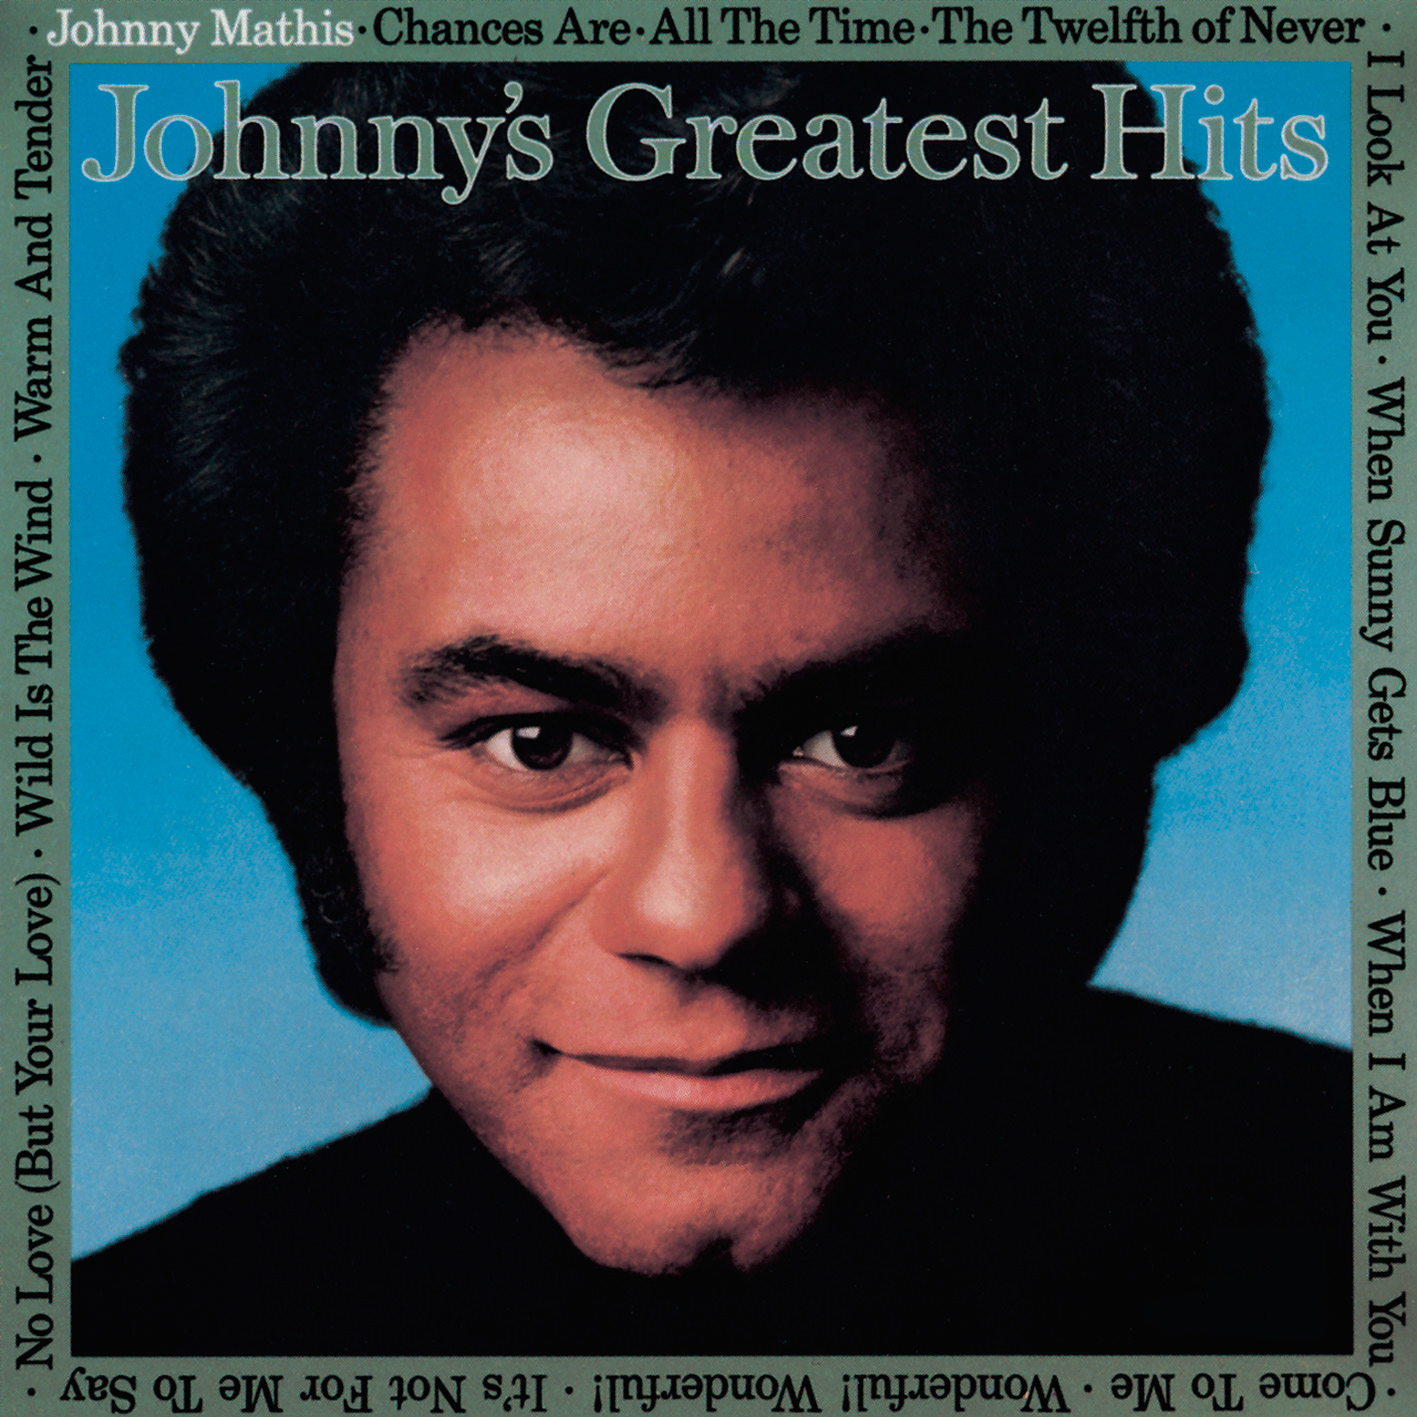 Johnny Mathis – Johnny’s Greatest Hits (1958/2018) [AcousticSounds FLAC 24bit/192kHz]